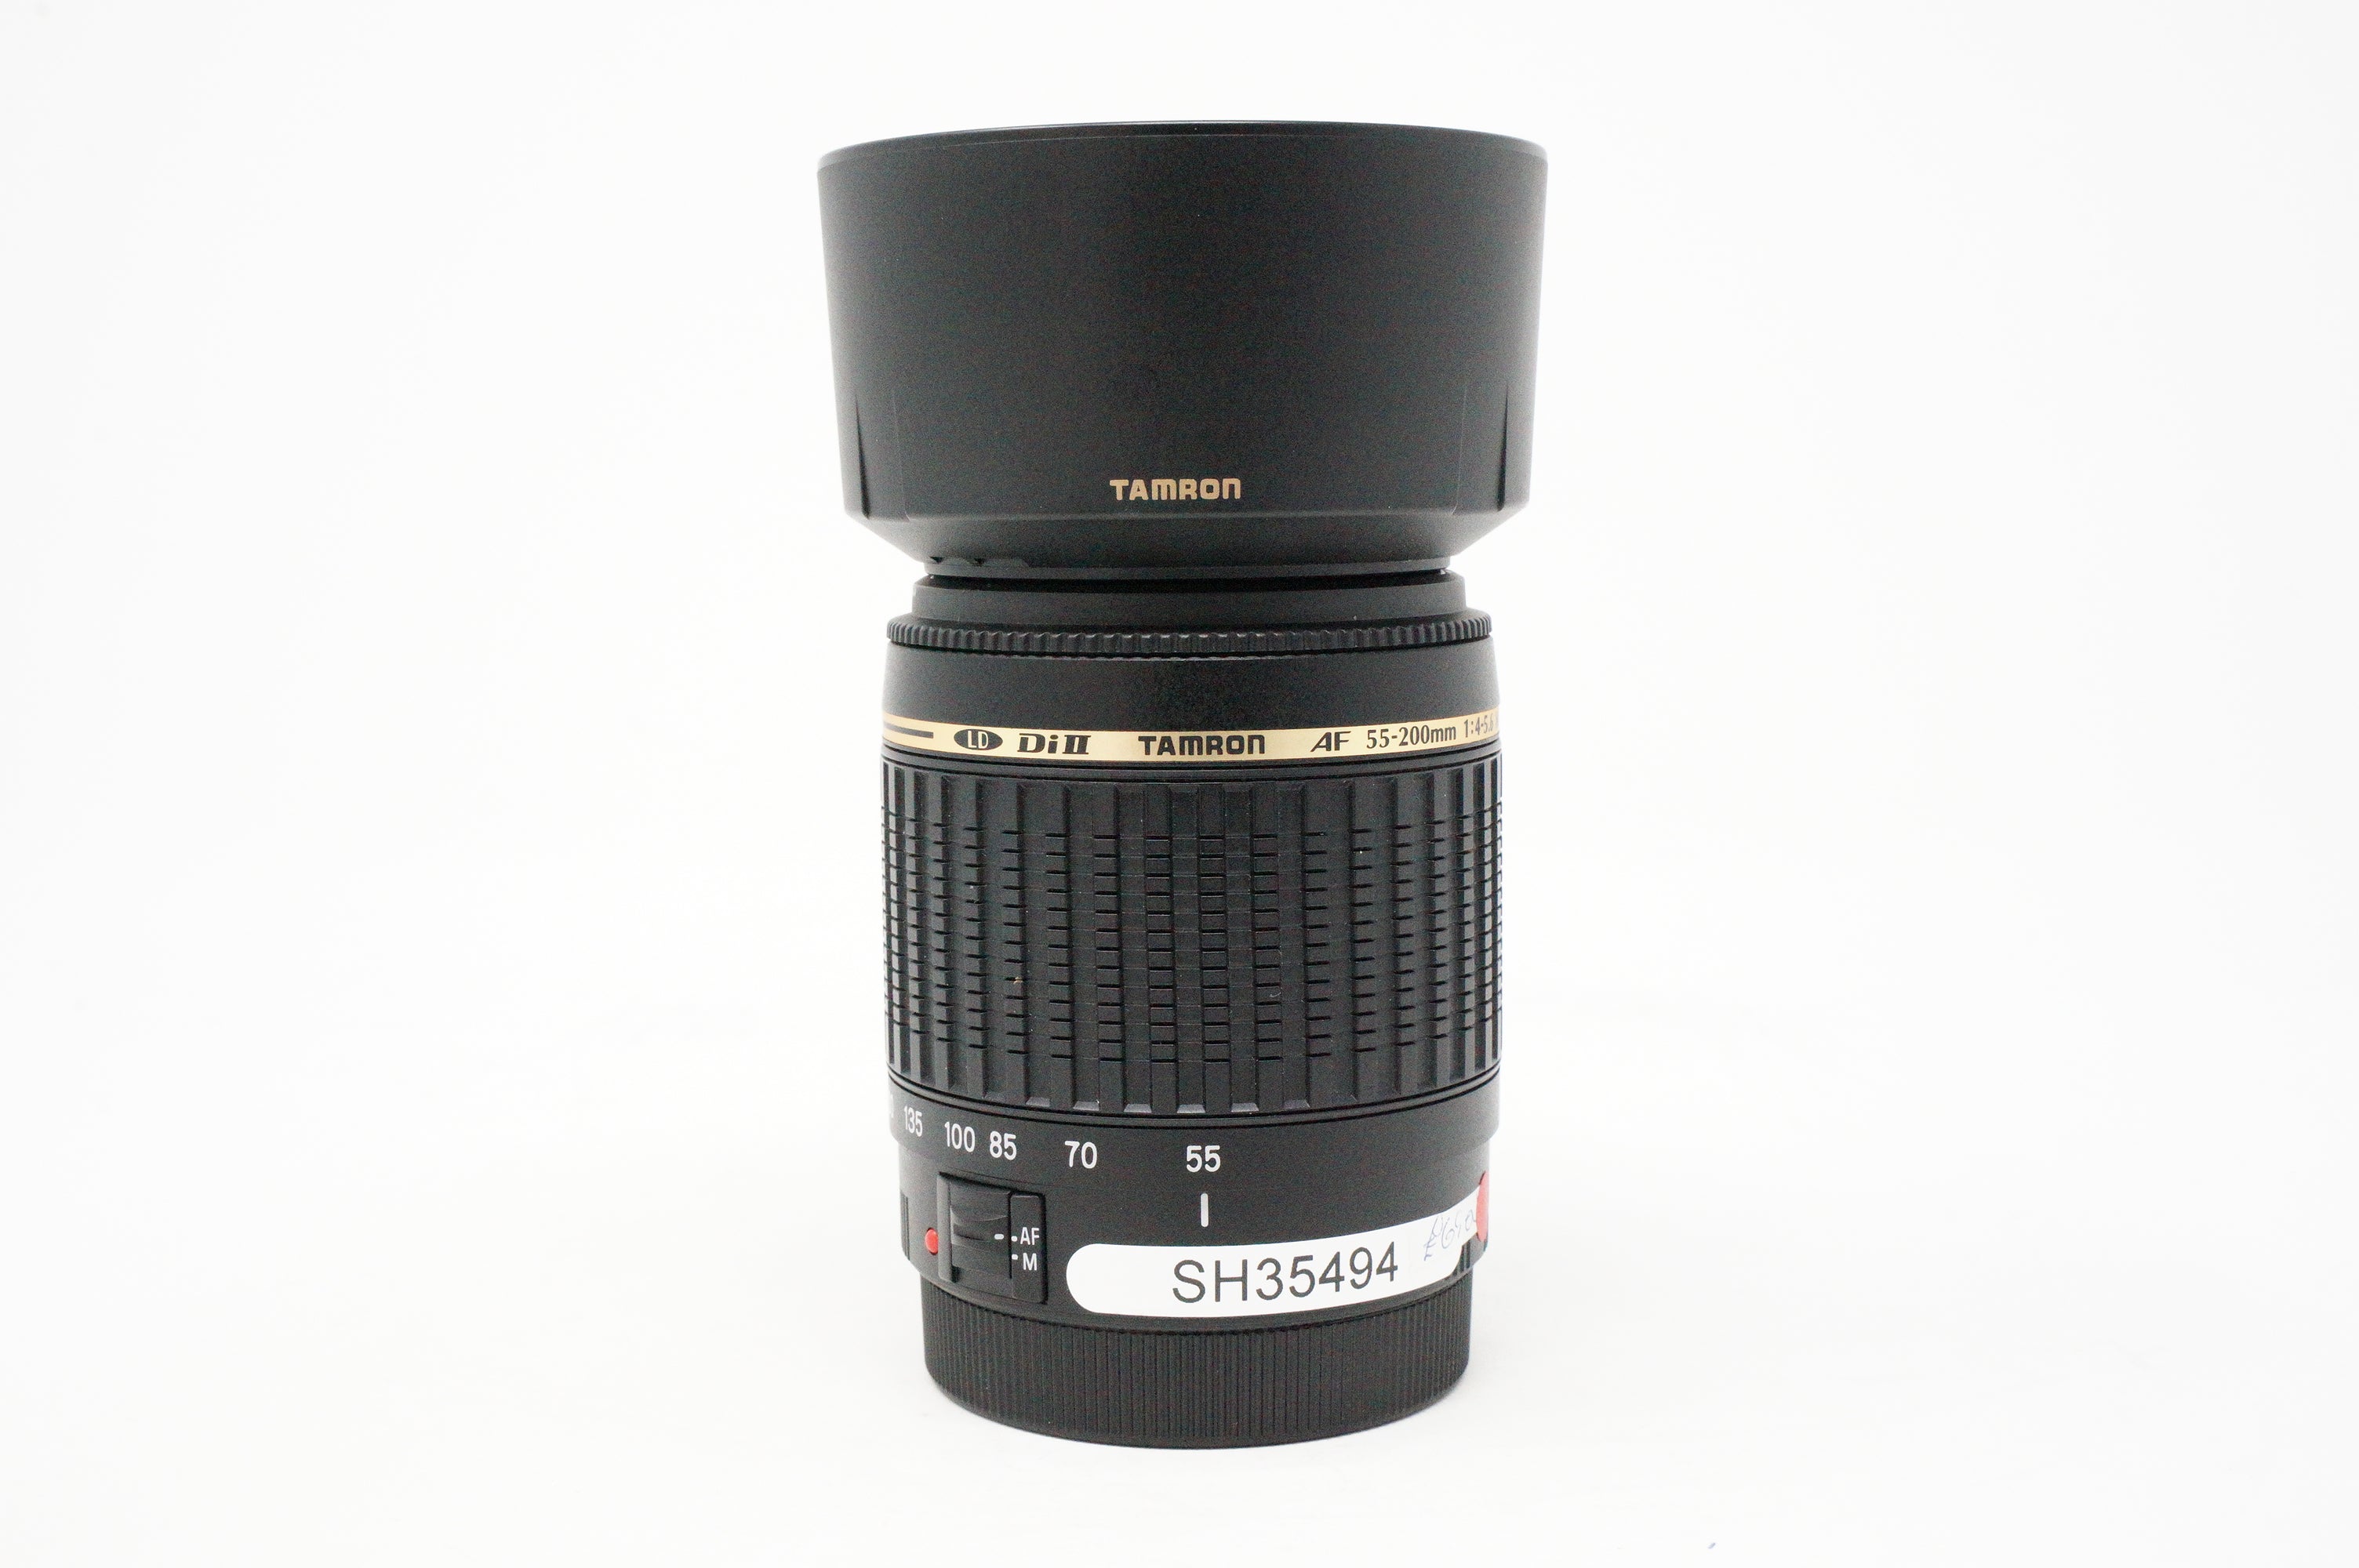 Product Image of Used Tamron AF 55-200mm F4/5.6 Macro Di II Lens for Canon (SH35494)